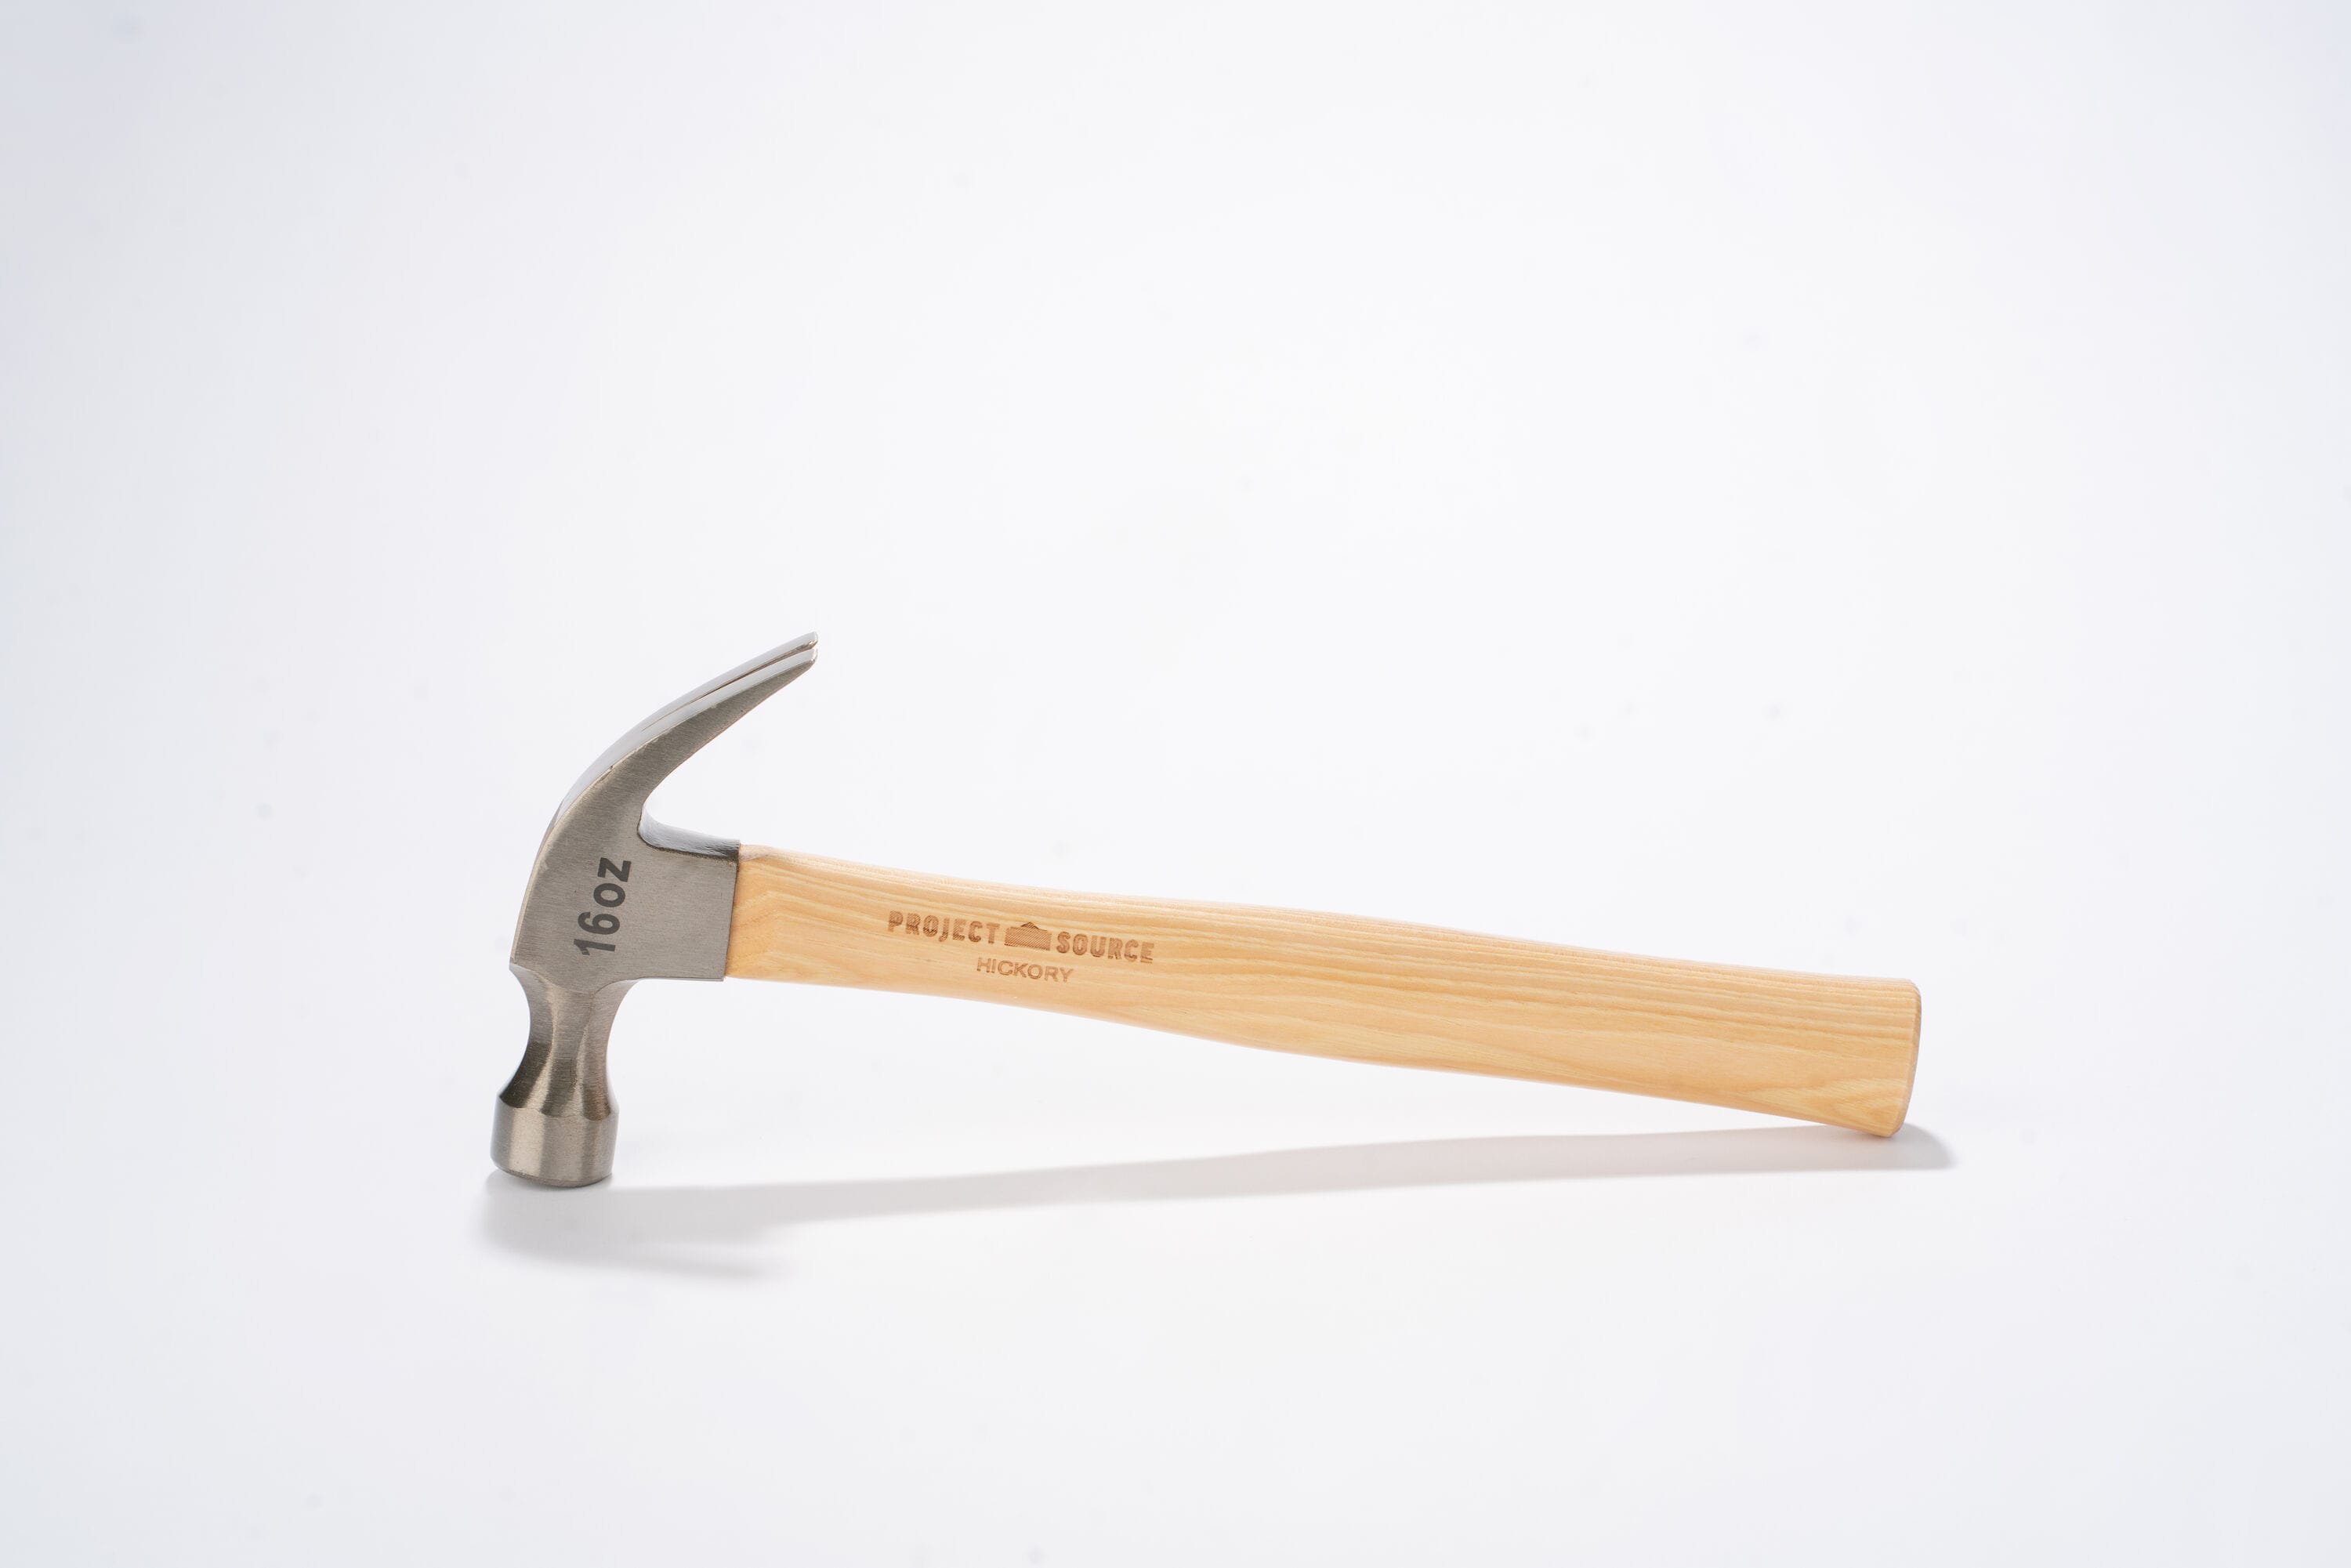 Project Source 16-oz Smooth Face Steel Head Wood Claw Hammer